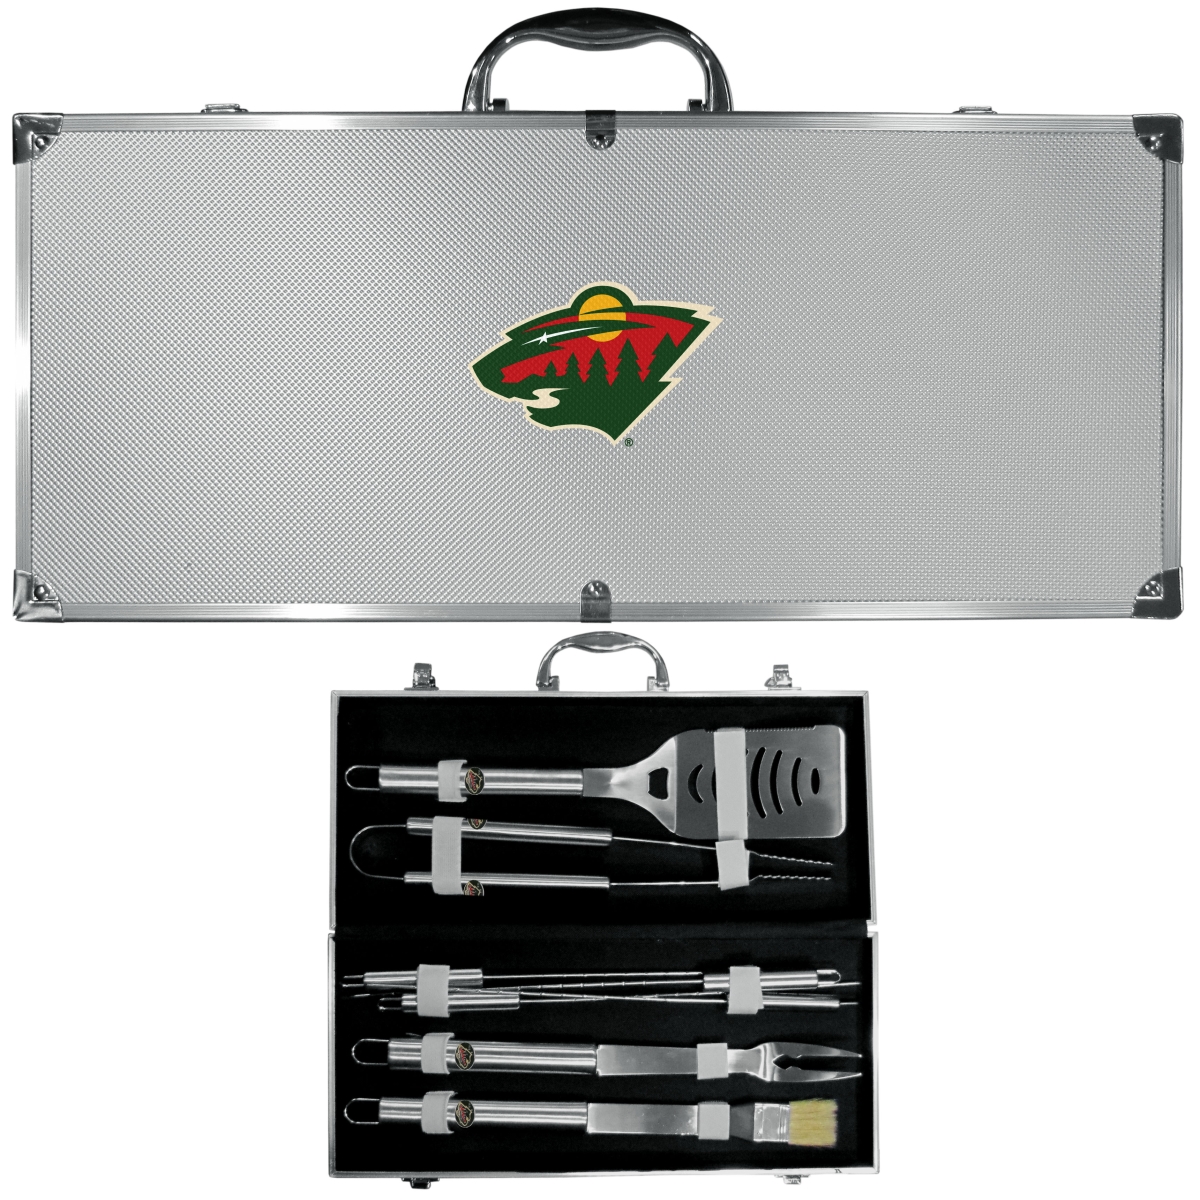 Picture of Siskiyou BBQH145B Unisex NHL Minnesota Wild 8 Piece Stainless Steel BBQ Set with Metal Case